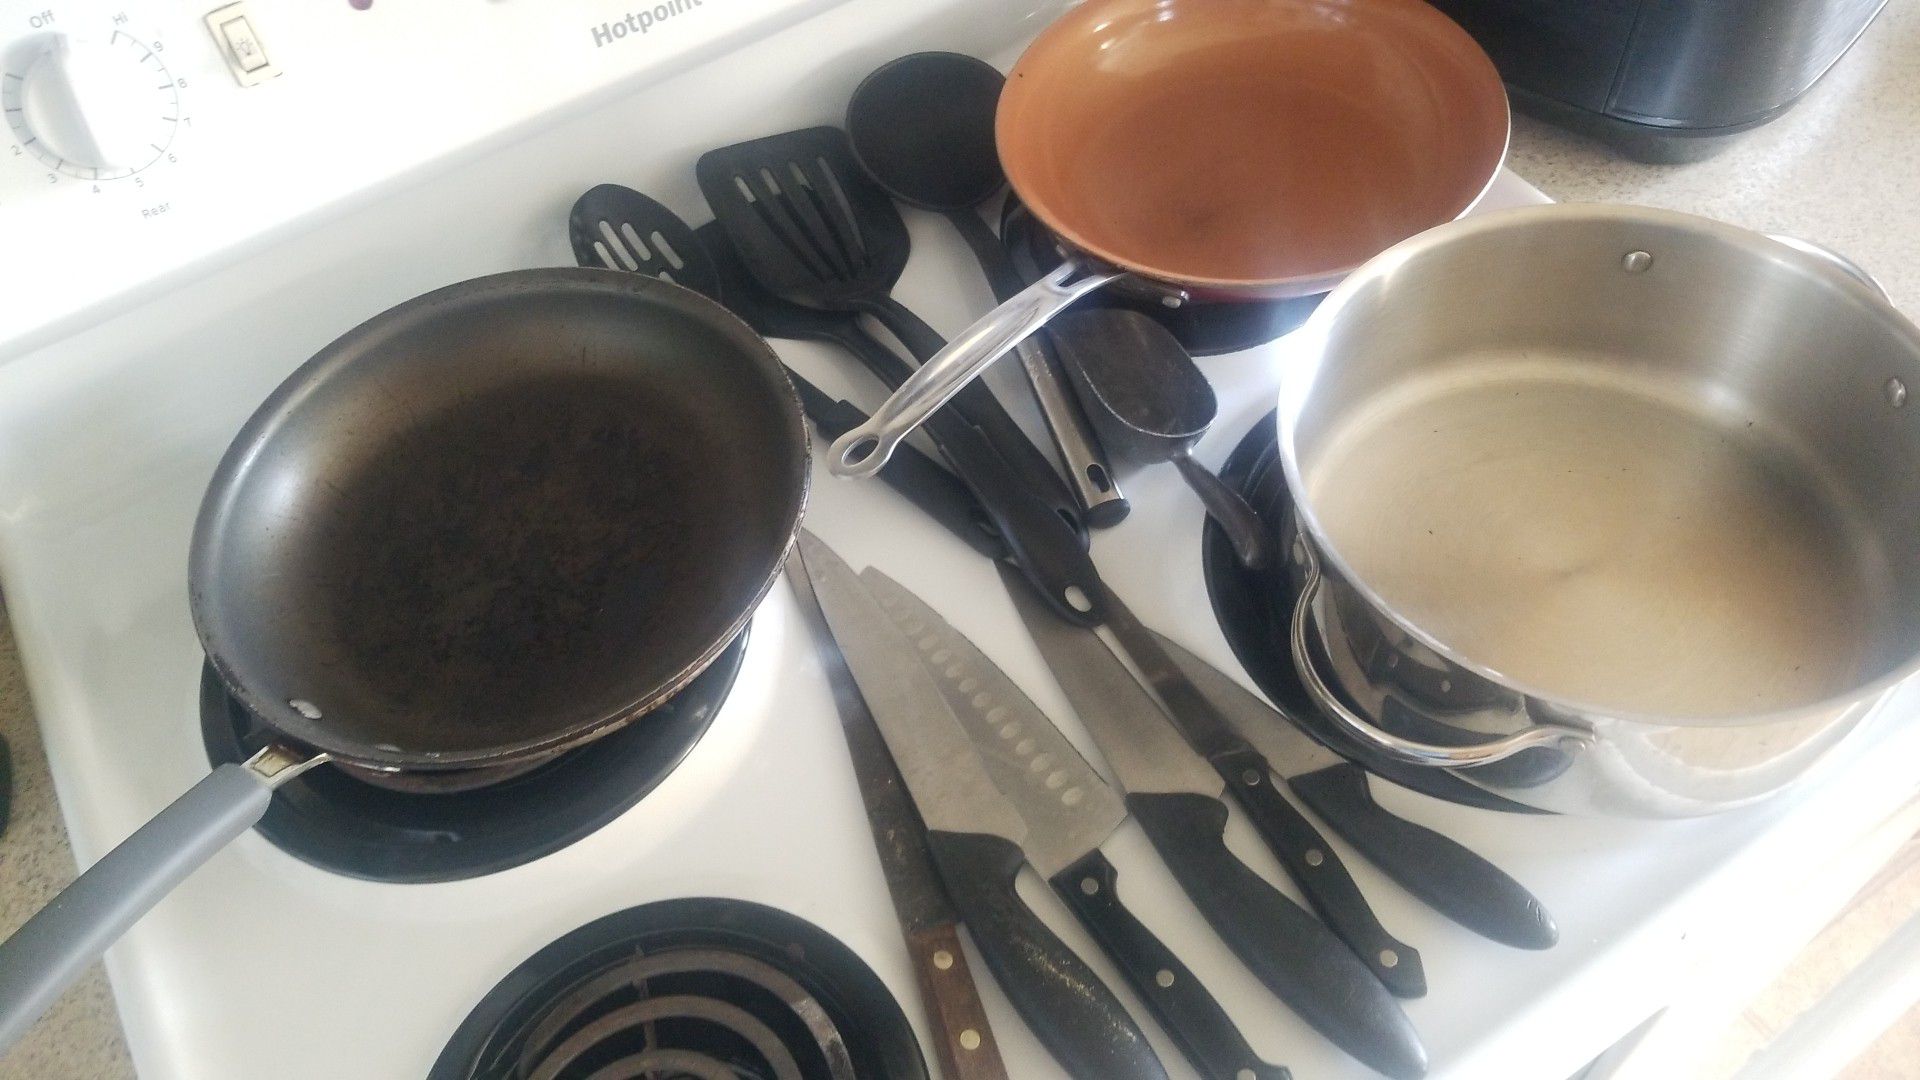 Cook wear and utensils